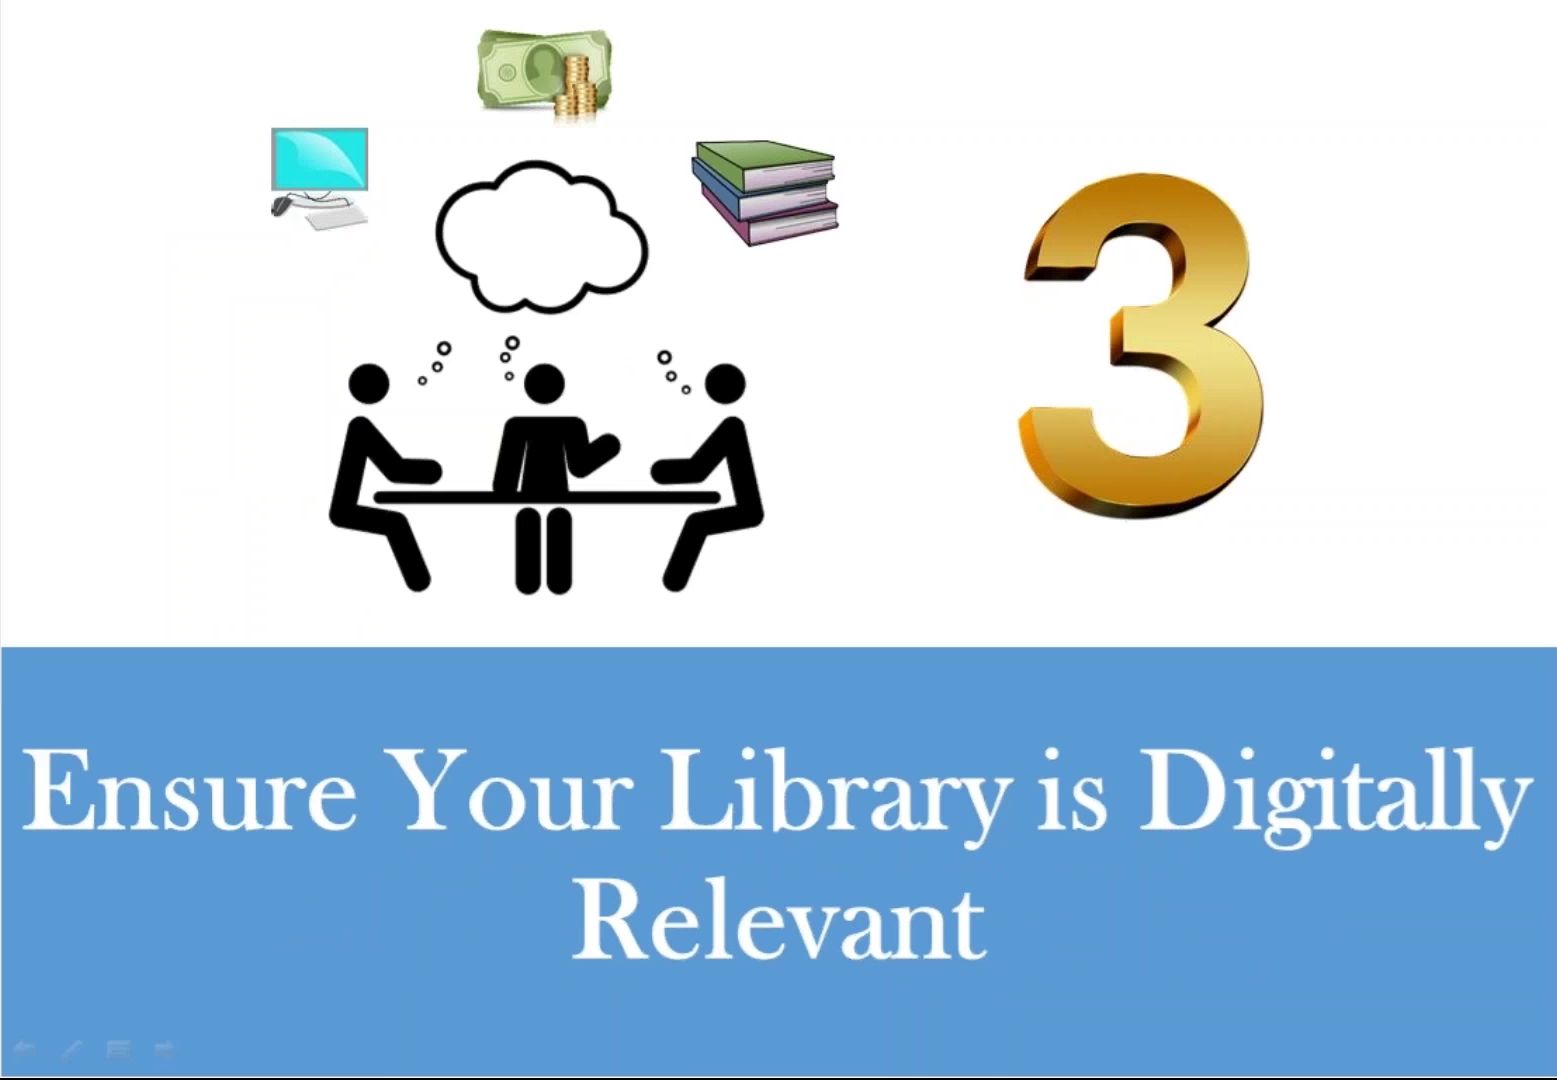 Ensure your library is digitally relevant